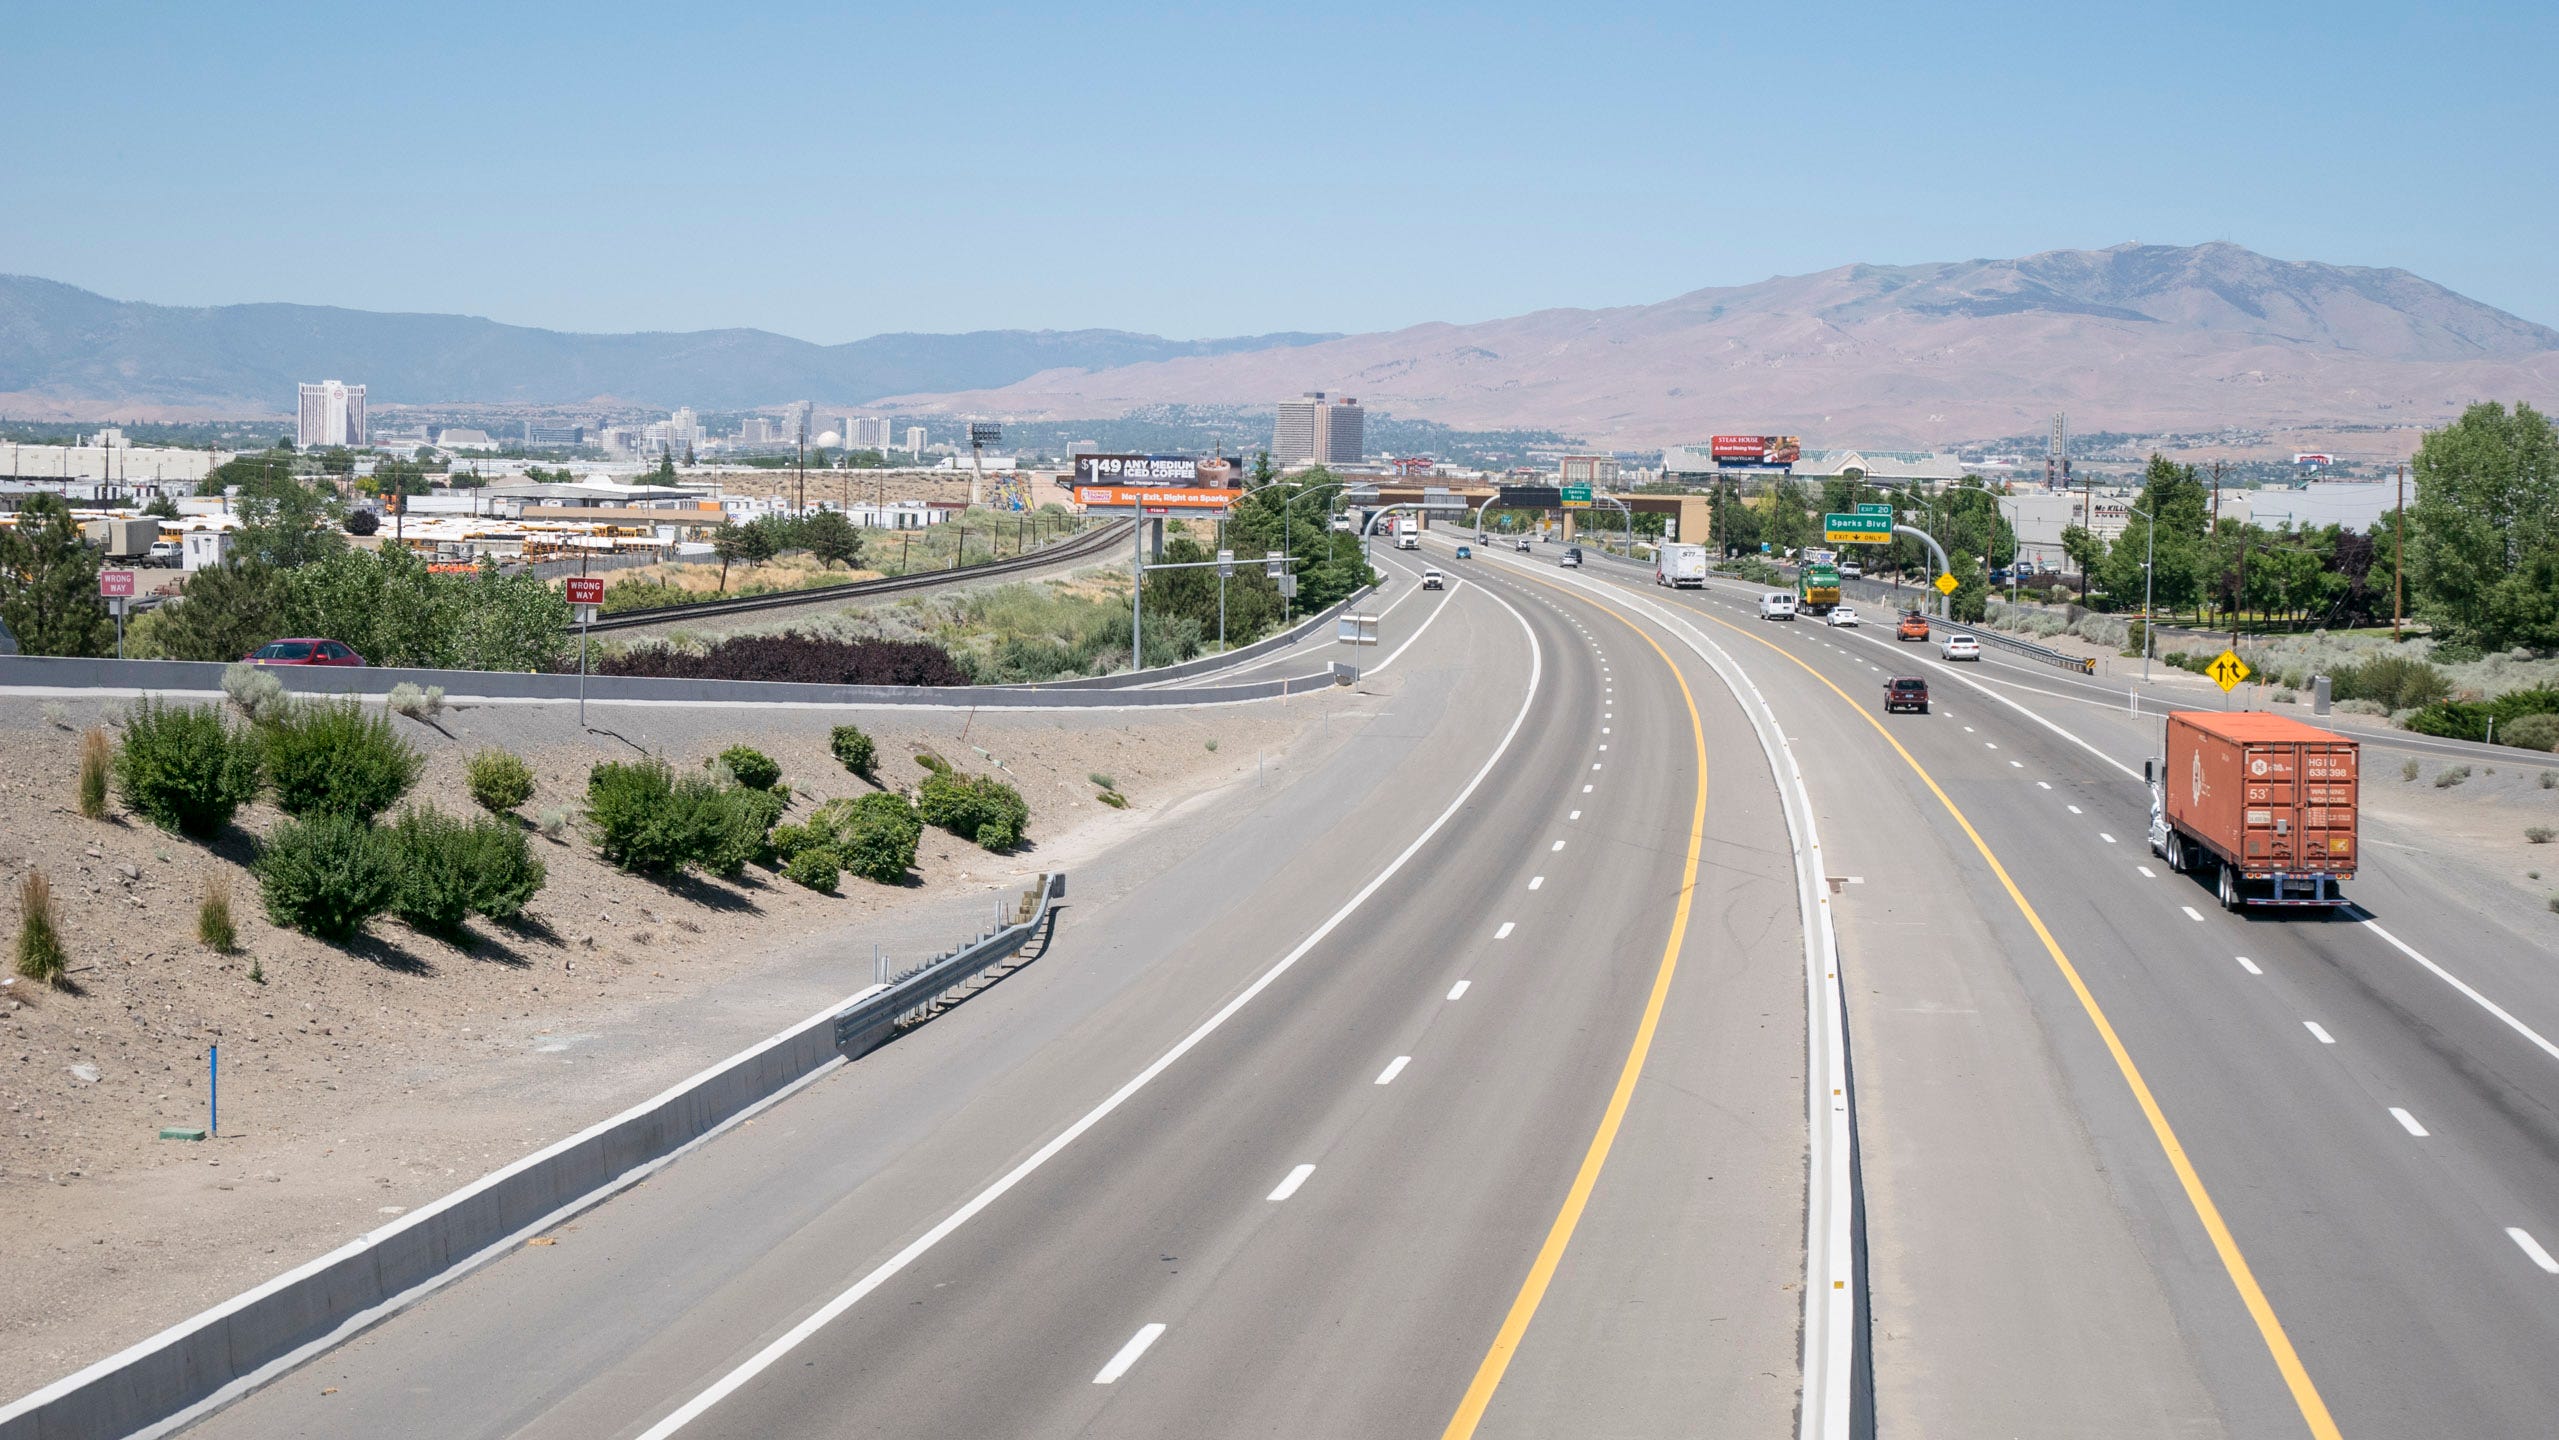 Photo of a wide interstate, two lanes in each direction with generous shoulders on each side, arcing towards downtown Reno, Nevada. There are a smattering of cars and trucks on the road and a smattering of green vegetation in dry sandy soil on either side of the road. A highway exit ramp can be seen on the left, and beyond that are railroad tracks. The road bends and its vanishing point the skyline of downtown Reno can be seen. Beyond the buildings are tall mountains on the other side of the valley. The mountain on the right is tall and sandy and pink with just a smattering of green near its rounded peak. Mountains on the left are greener and hazier.